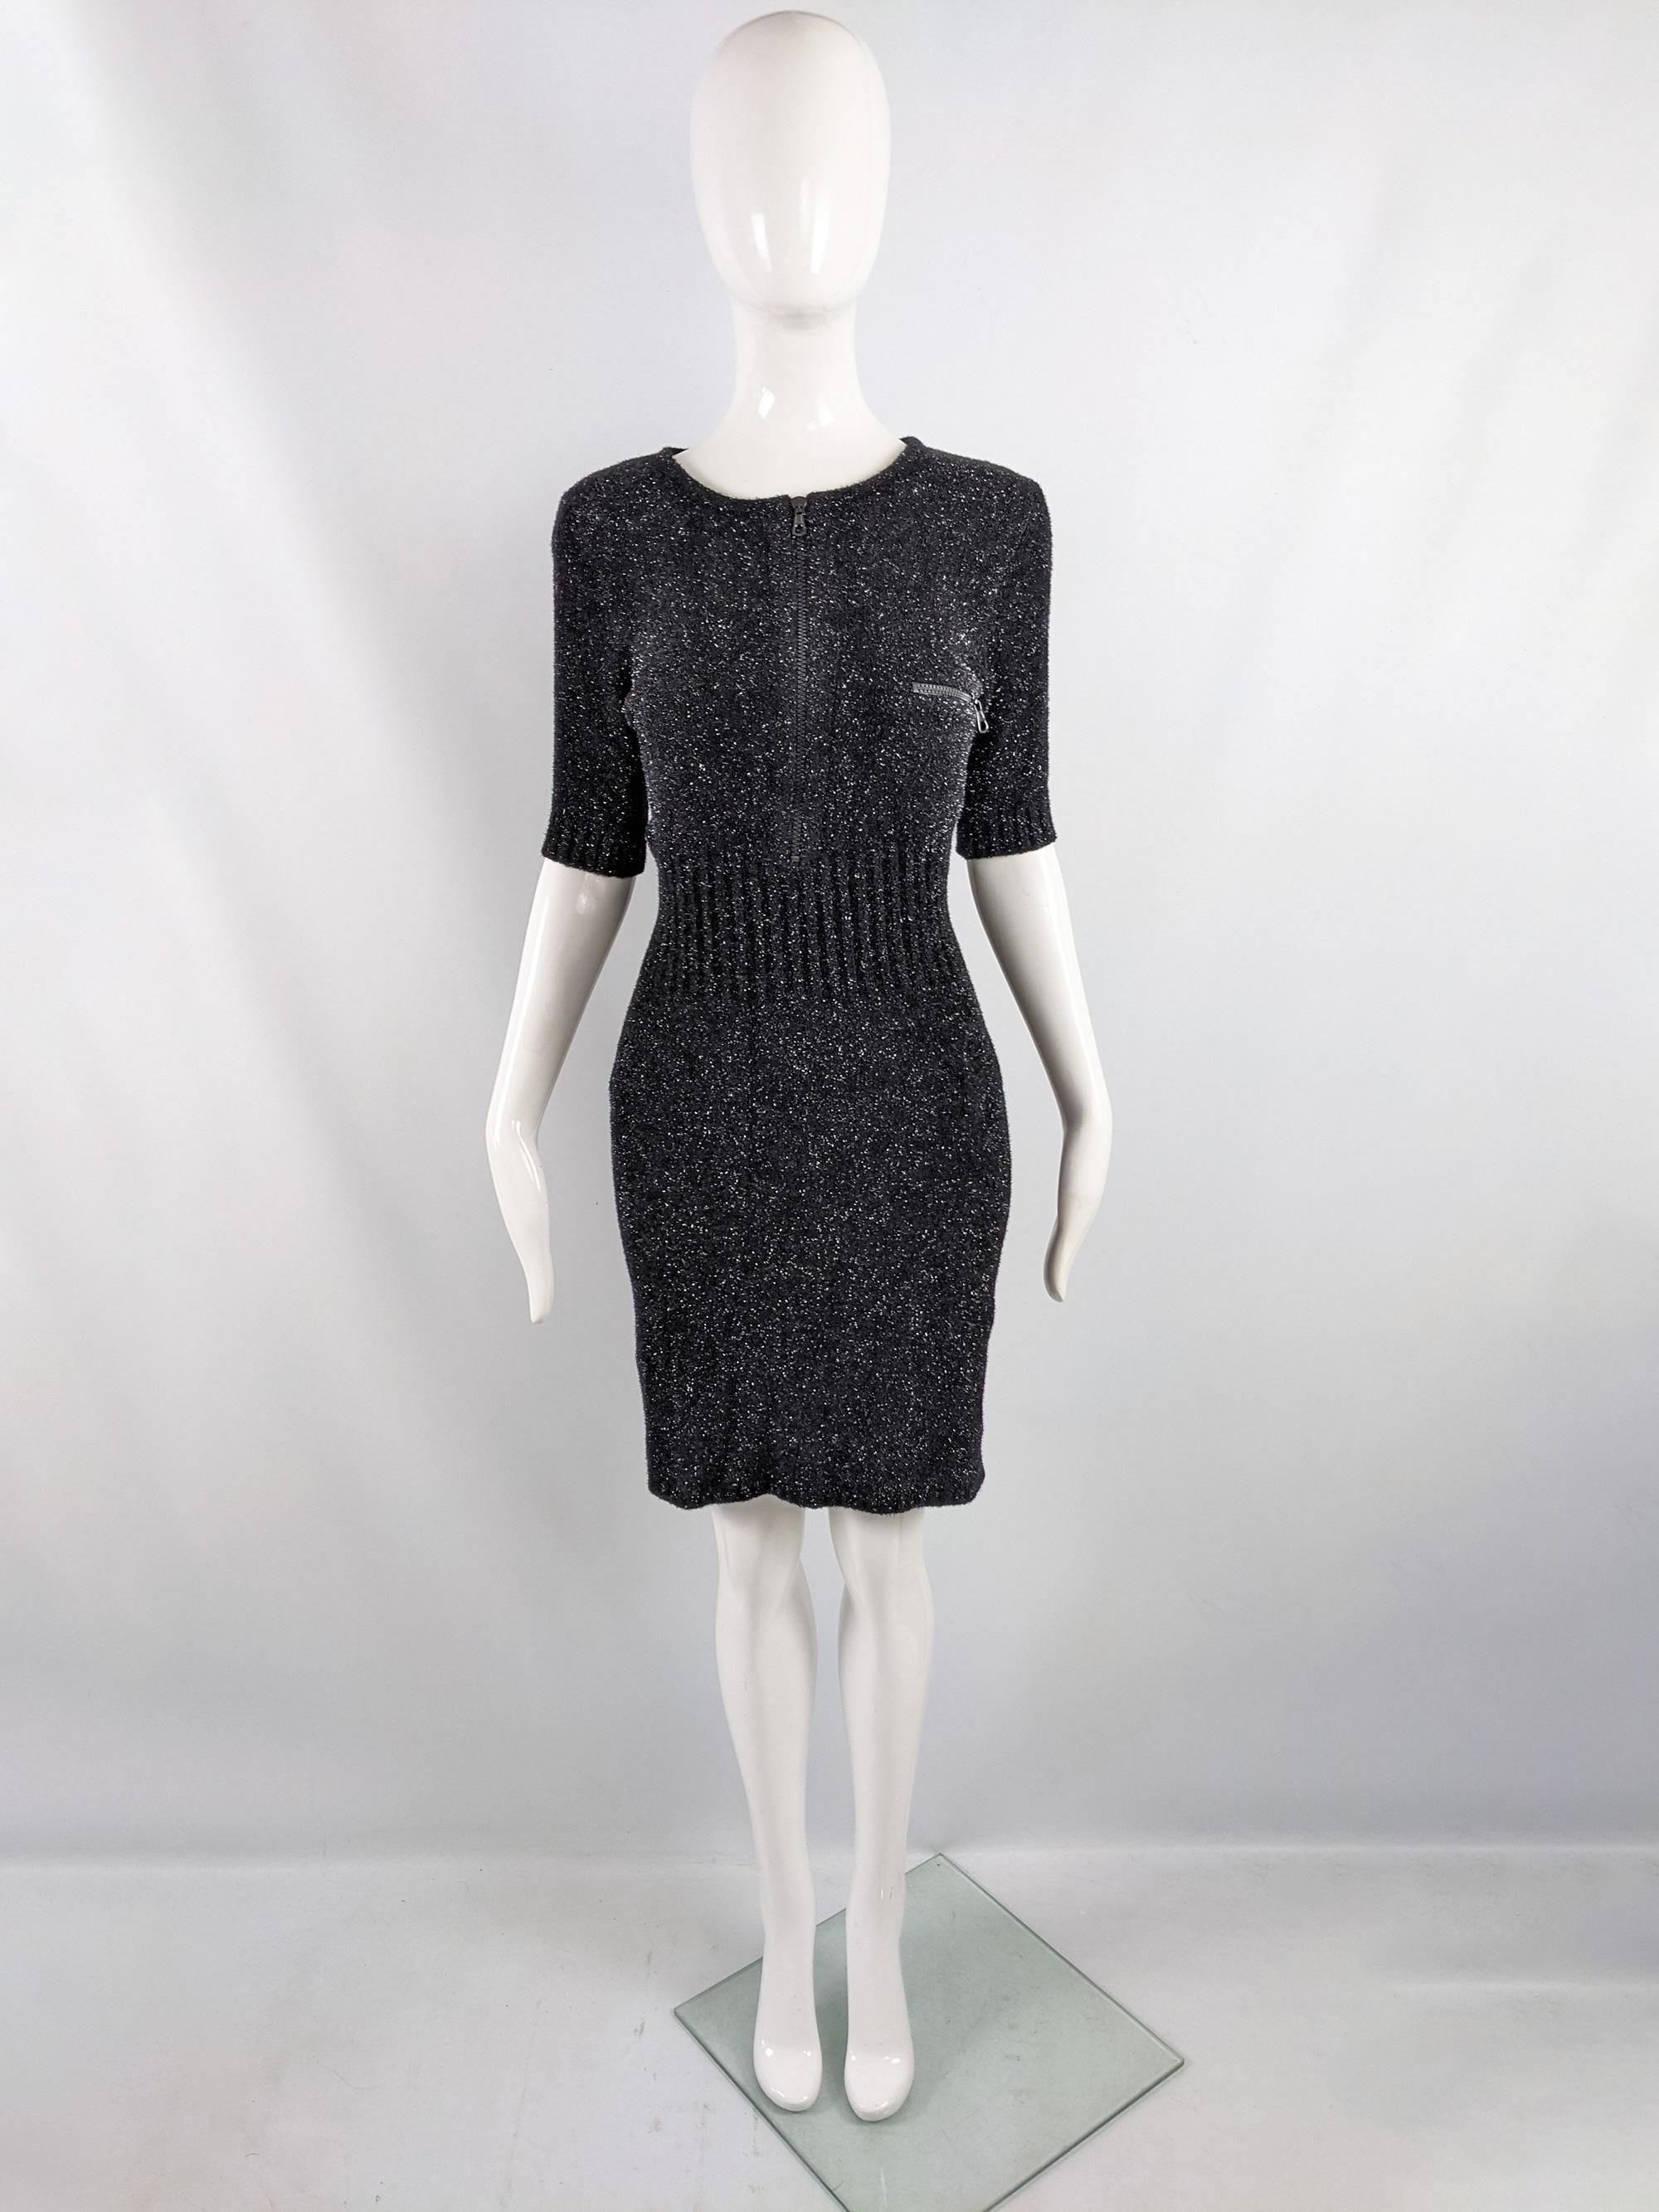 An amazing vintage womens short sleeve party dress from the late 90s / early 2000s by luxury British fashion house, Joseph for their iconic Tricot label. Italian made, in a black fluffy knit fabric with a glamorous metallic lurex thread adding